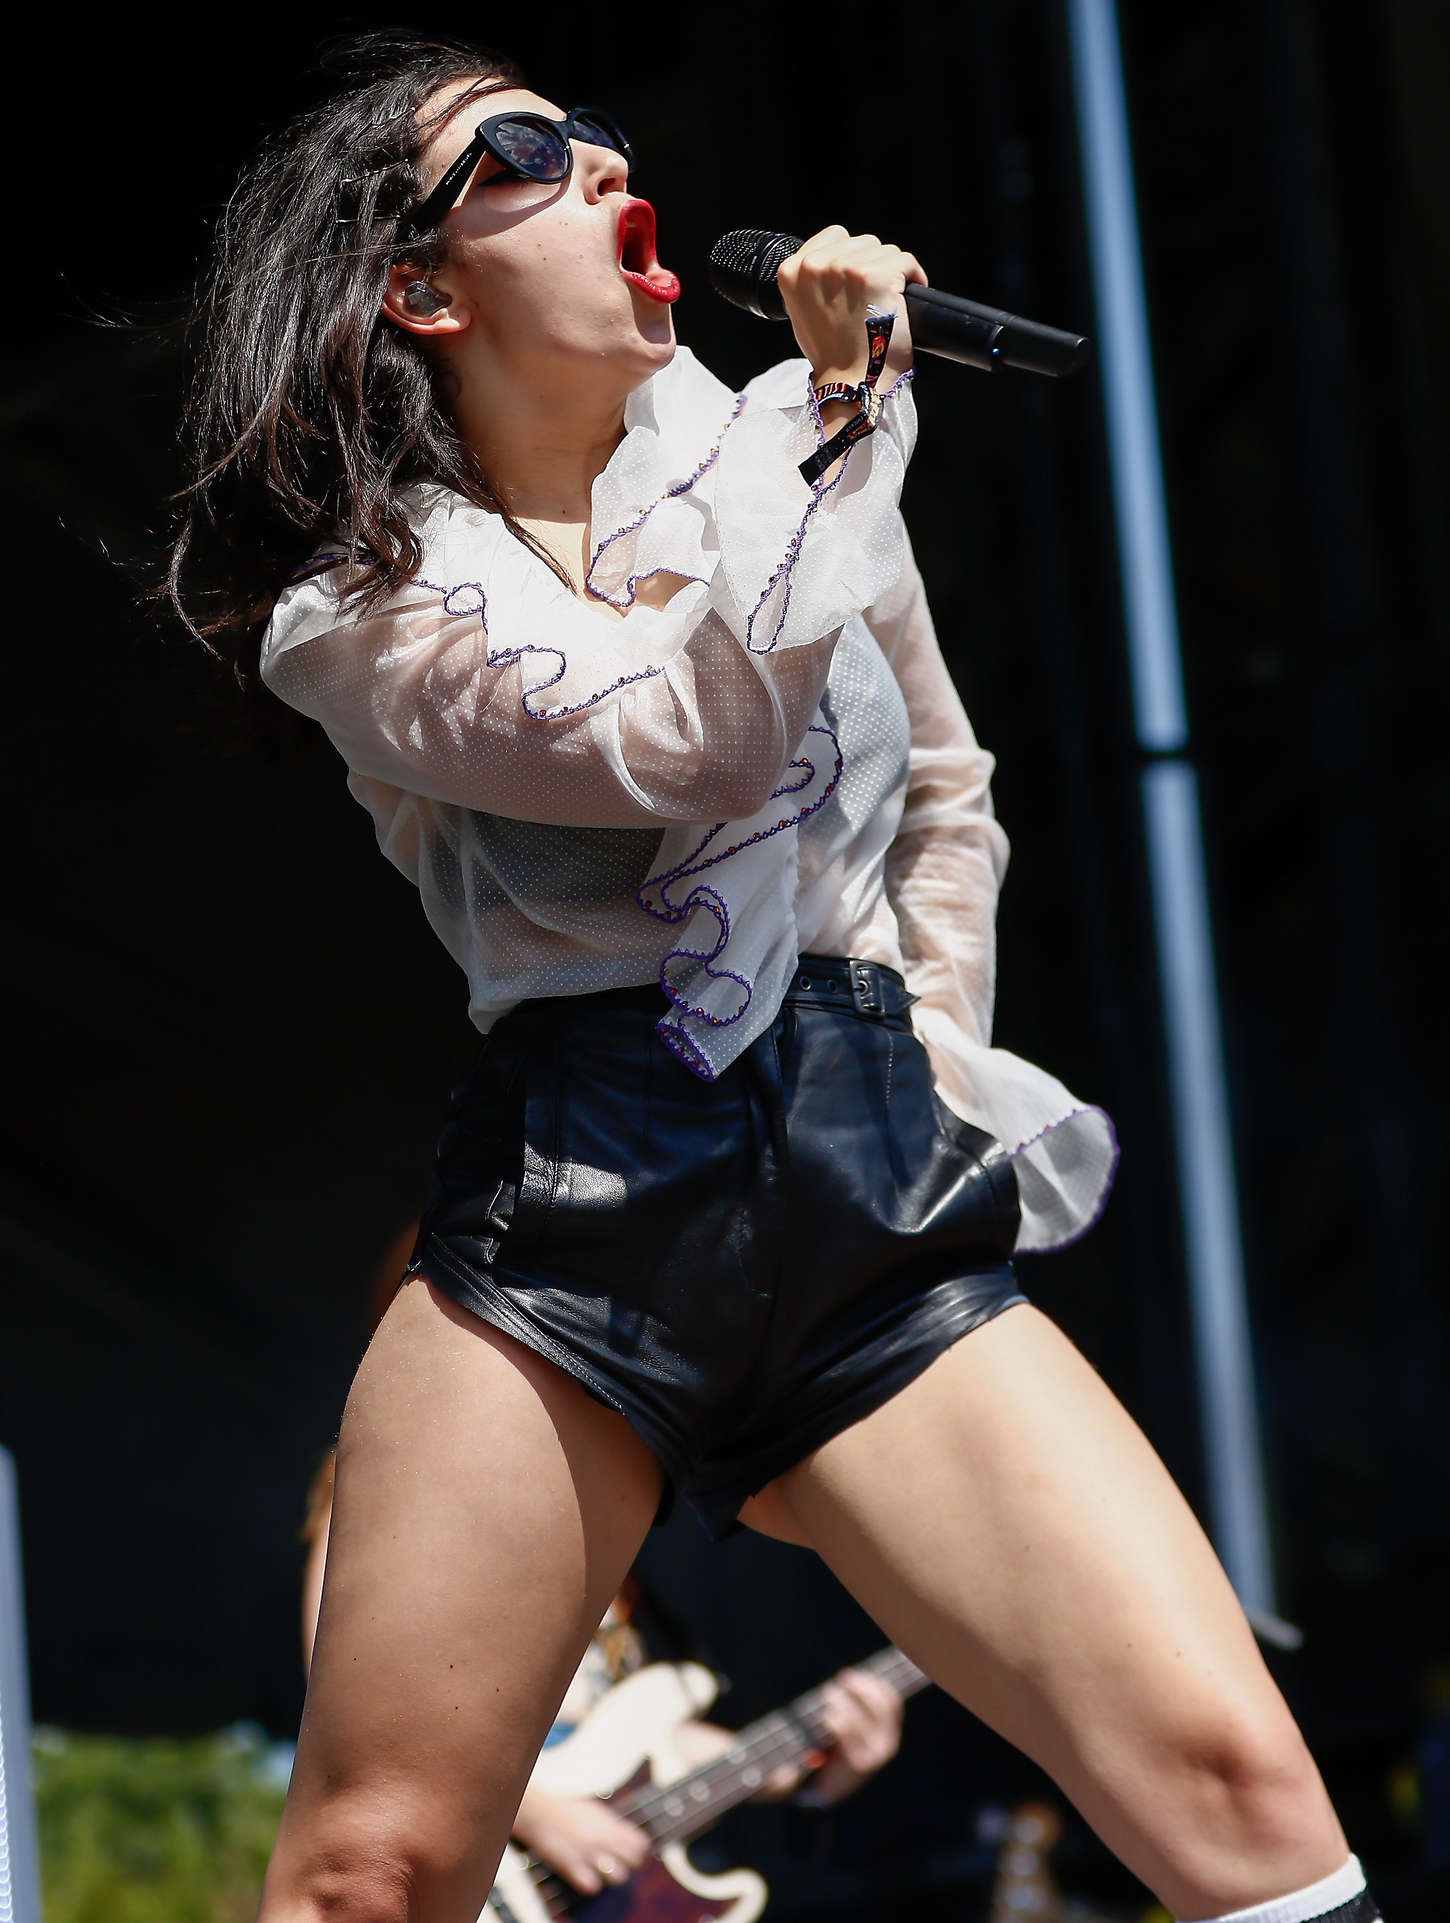 Charli XCX - Performance at 2015 Lollapalooza in Chicago. 